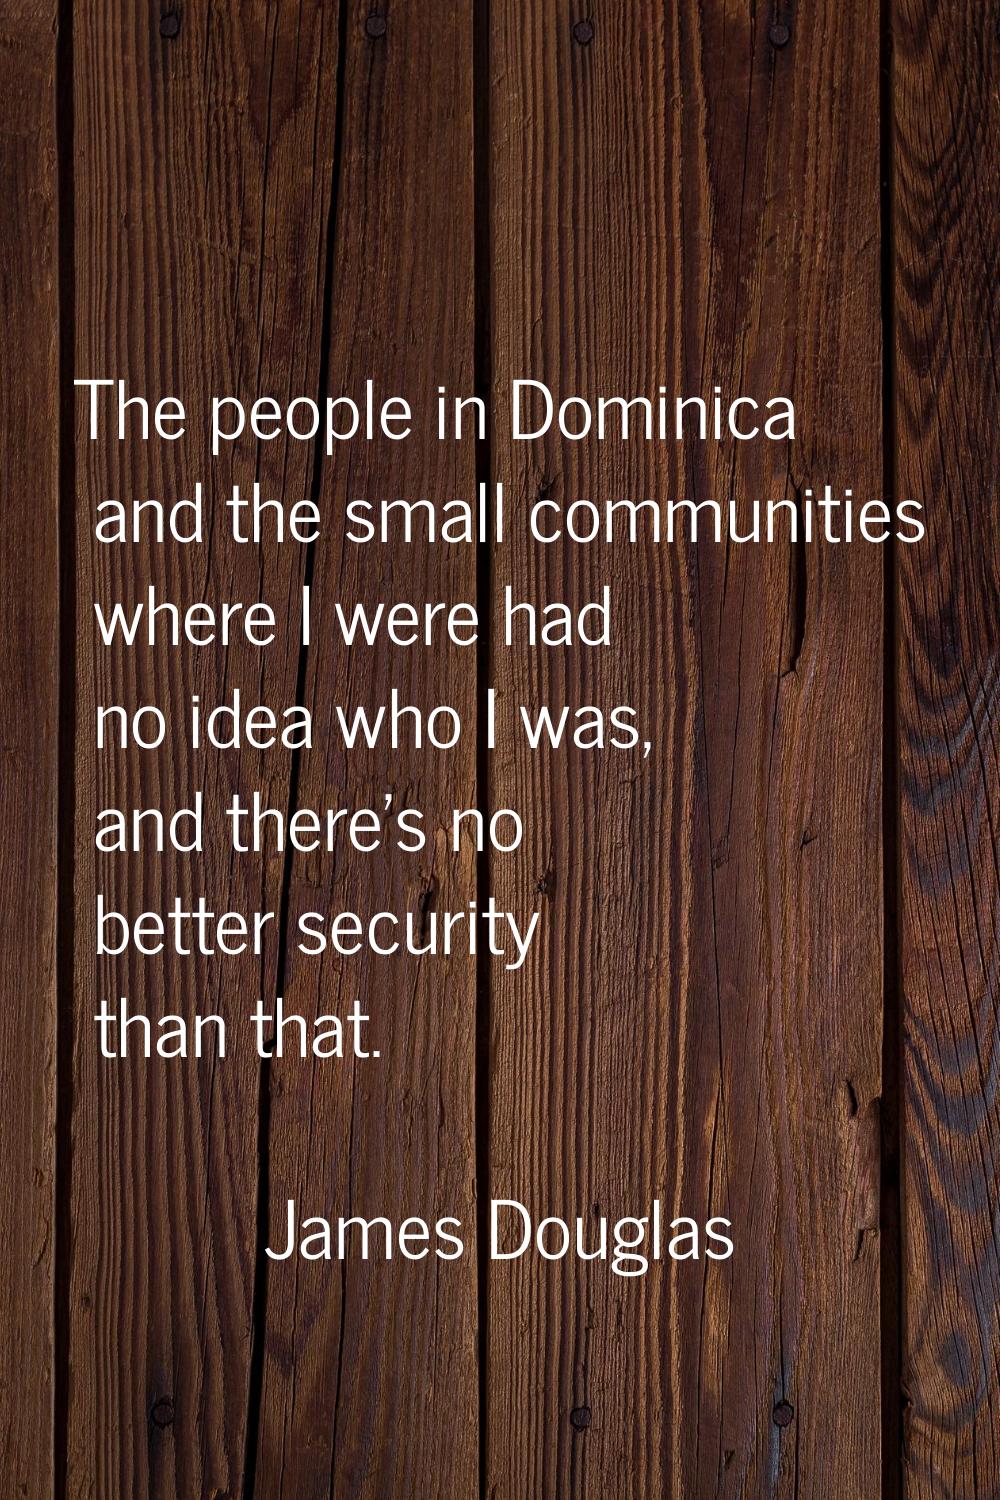 The people in Dominica and the small communities where I were had no idea who I was, and there's no